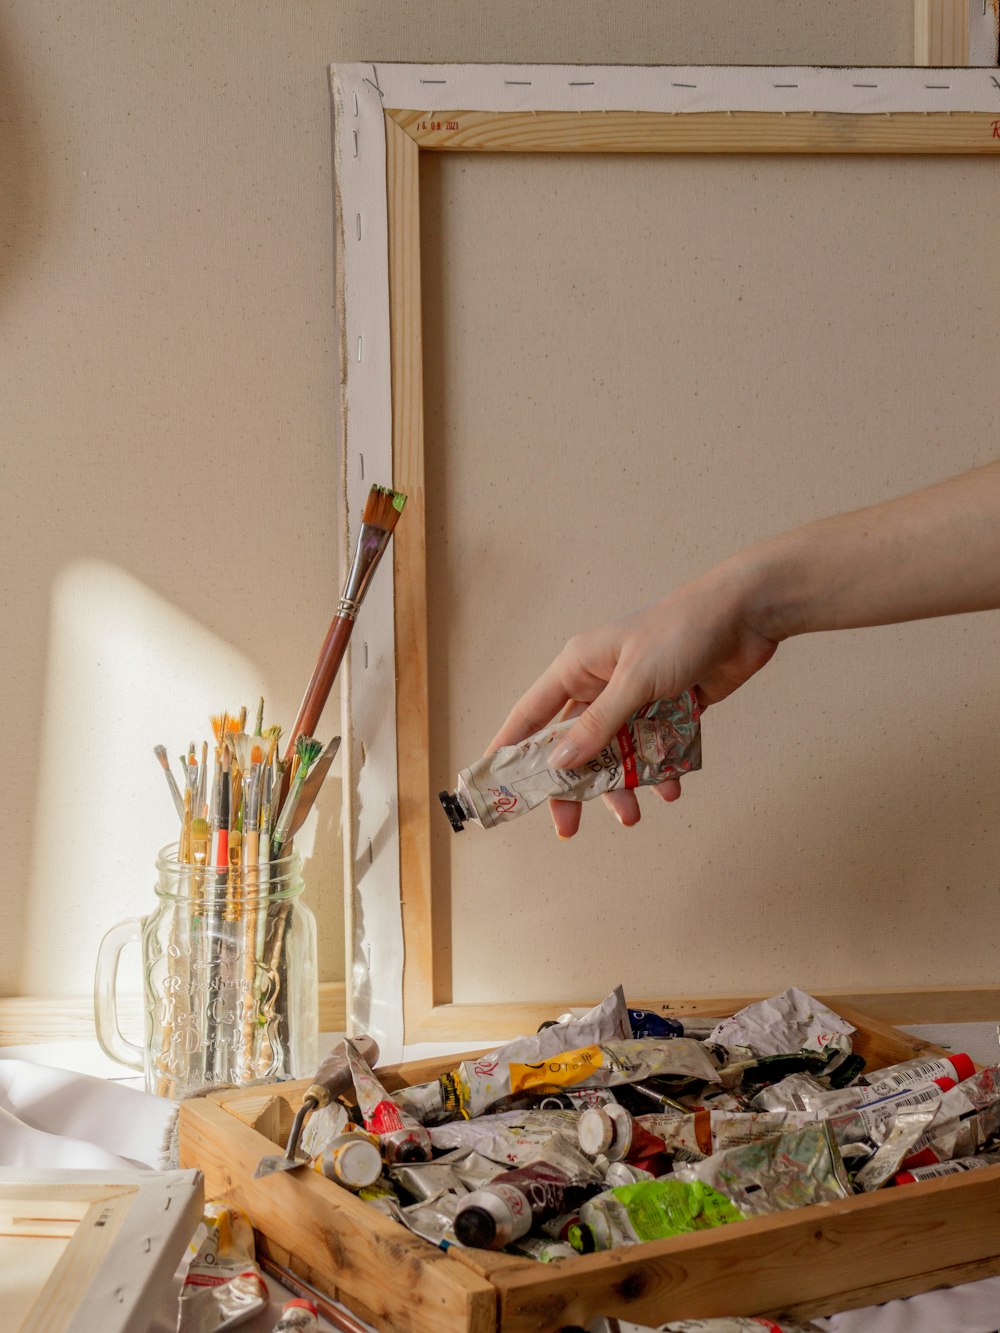 a person reaching for a bottle of paint in a wooden box